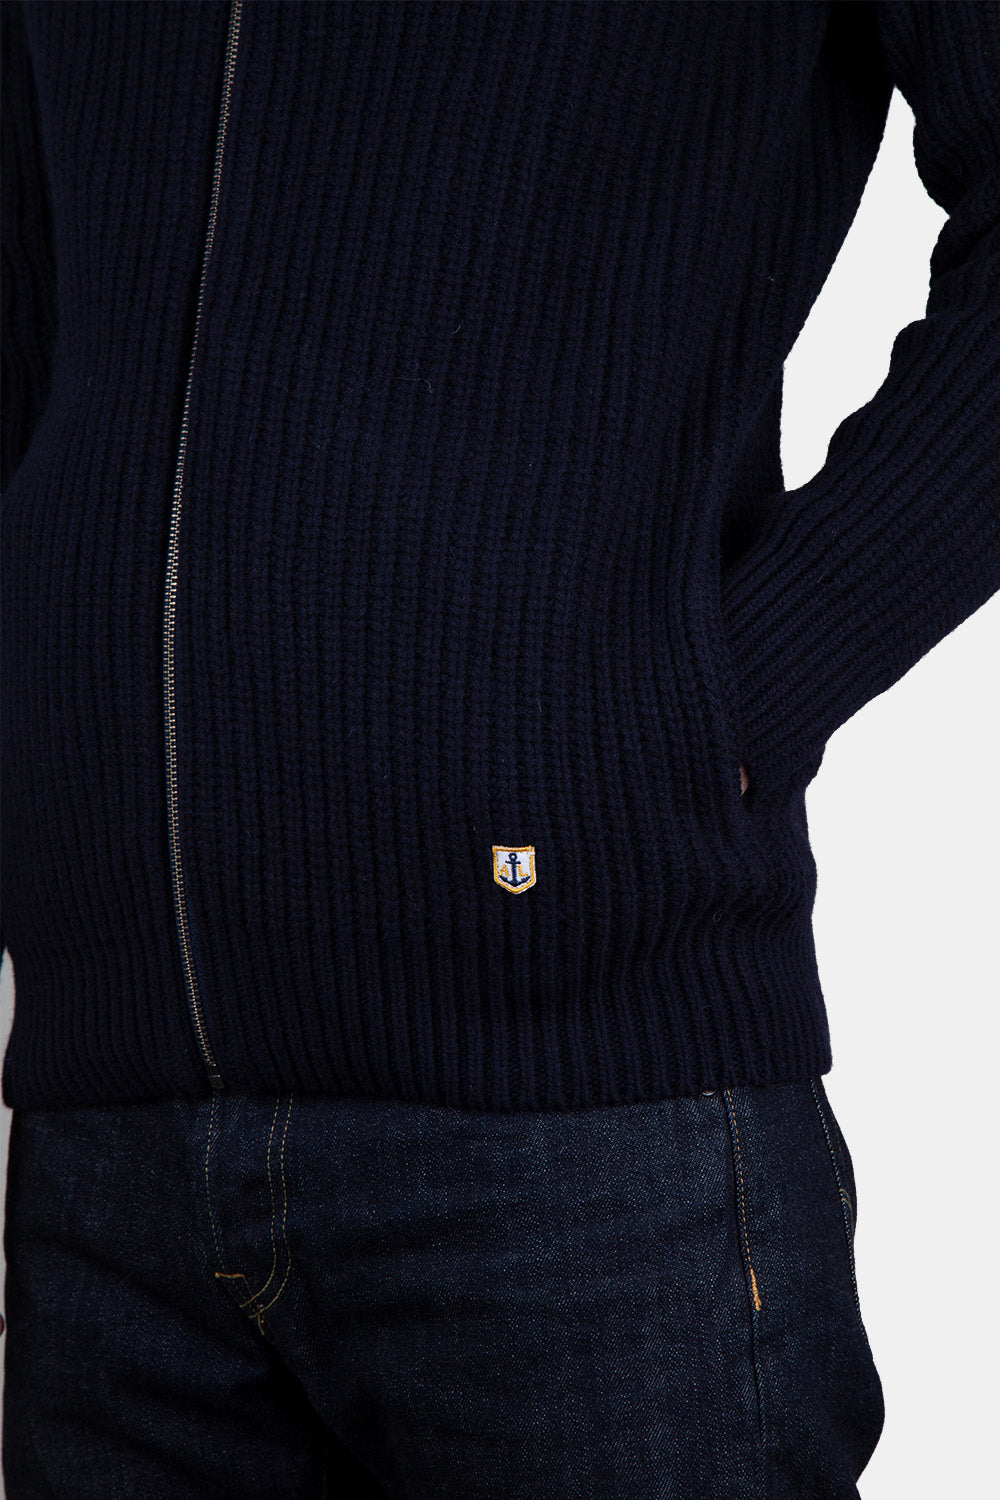 Armor Lux 2x2 Ribbed Zipped Knit (Navy)